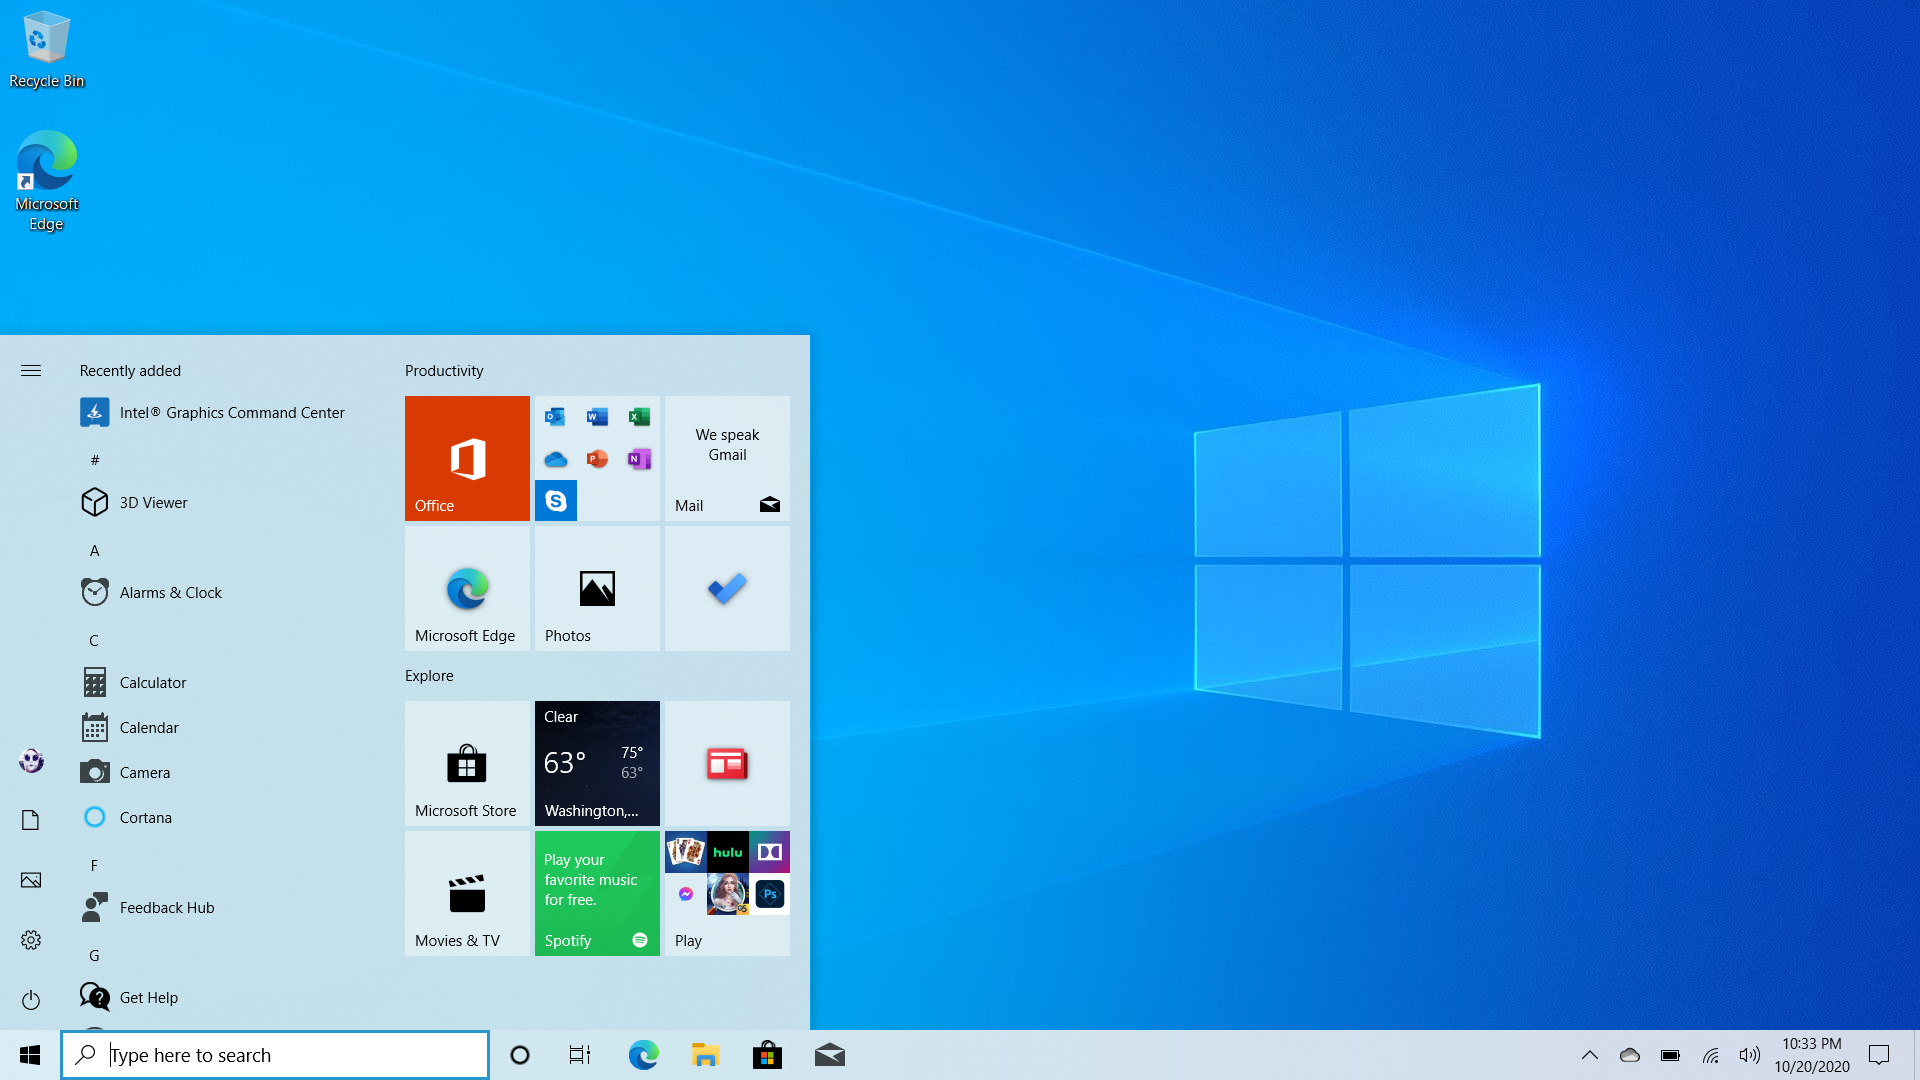 windows 10 review for mac